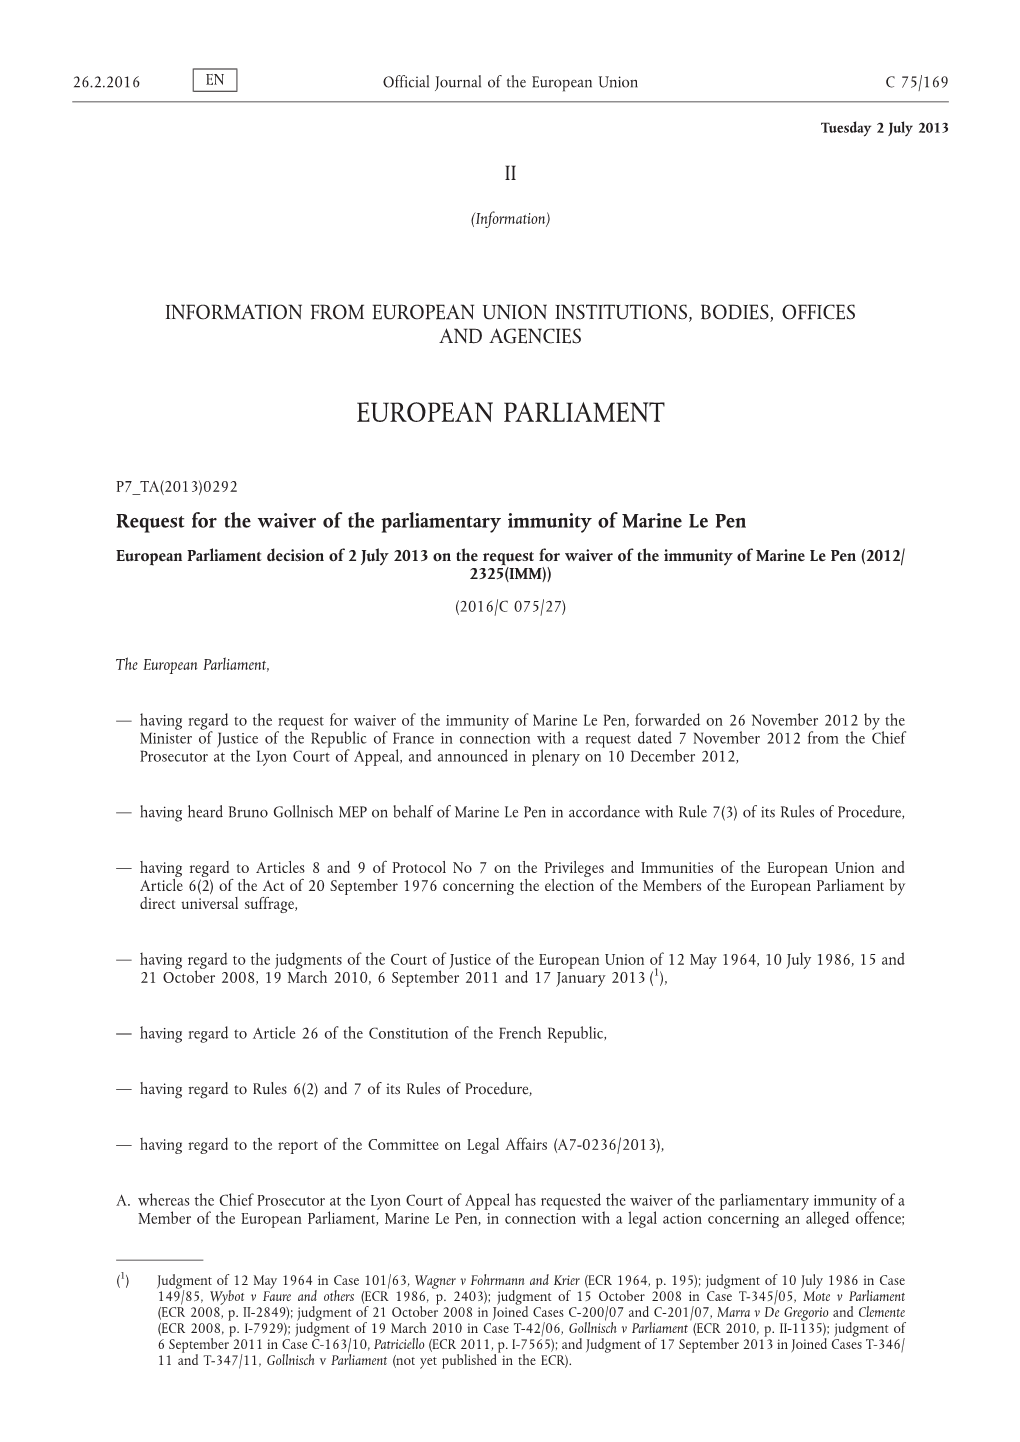 European Parliament Decision of 2 July 2013 on the Request for Waiver of the Immunity of Marine Le Pen (2012/ 2325(IMM)) (2016/C 075/27)